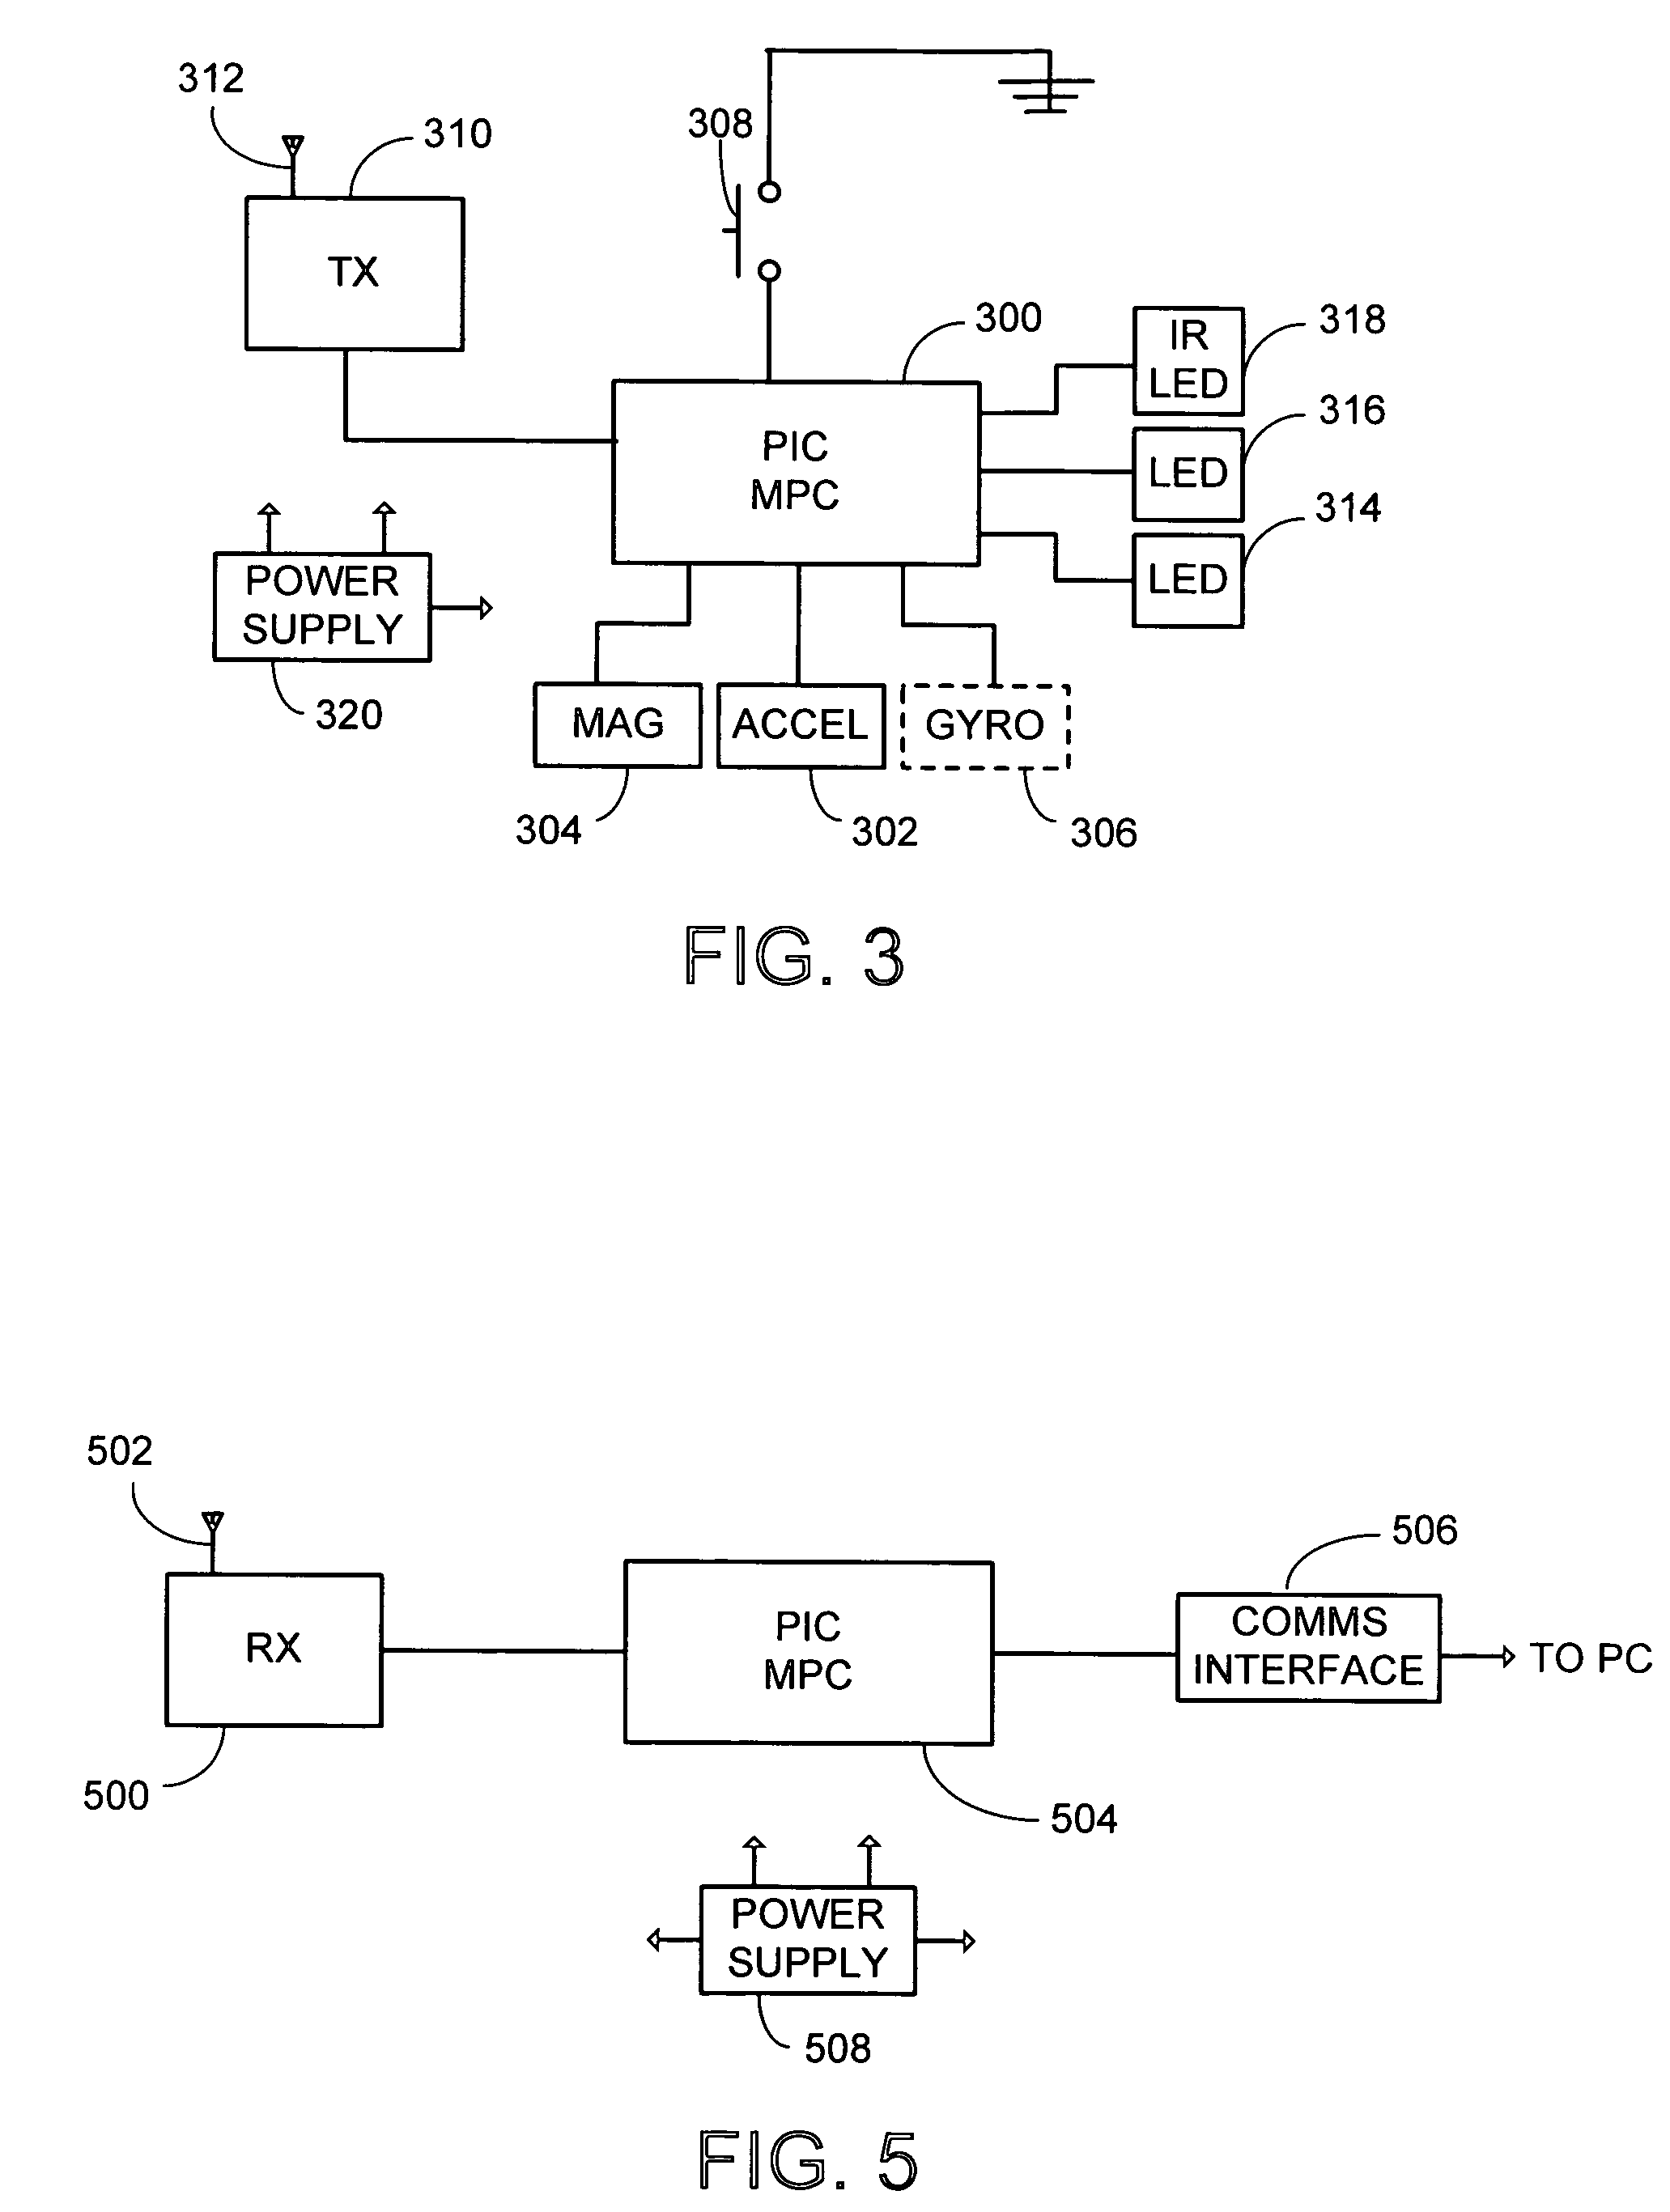 System and process for controlling electronic components in a ubiquitous computing environment using multimodal integration